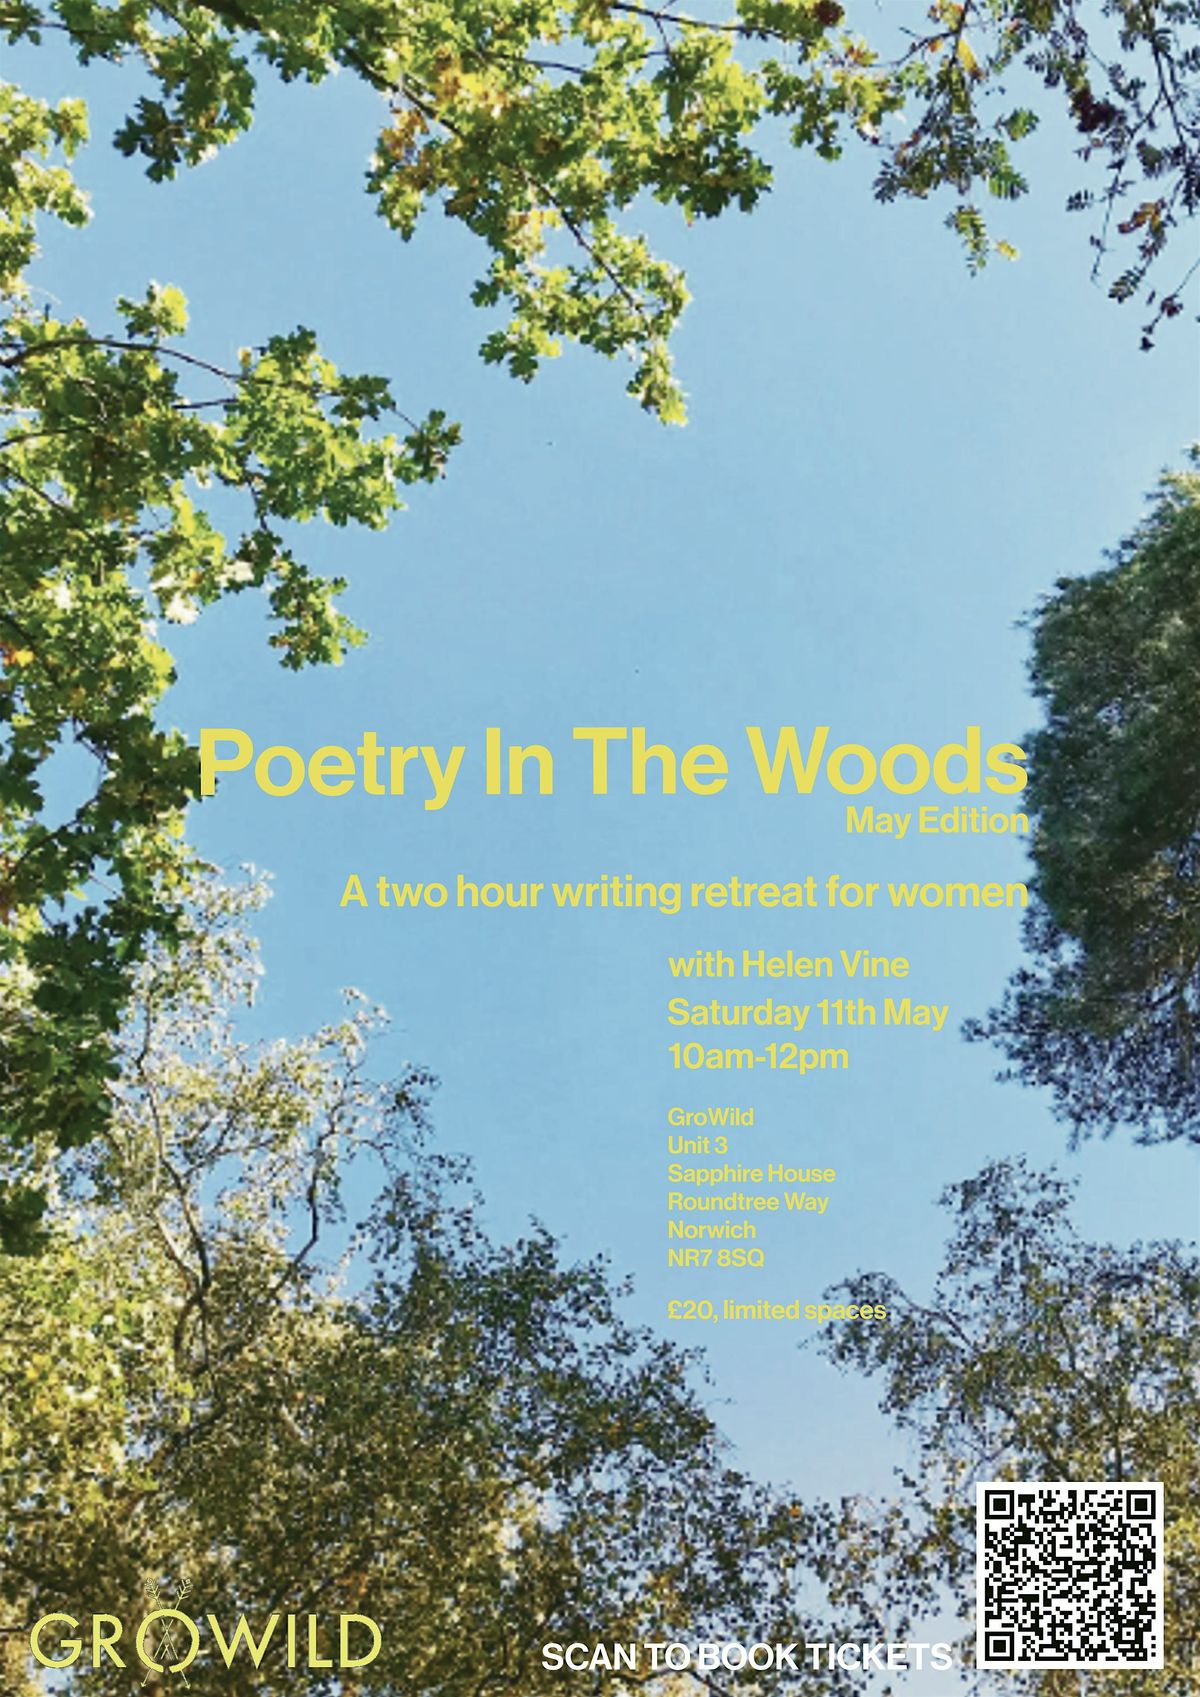 POETRY IN THE WOODS MAY EDITION